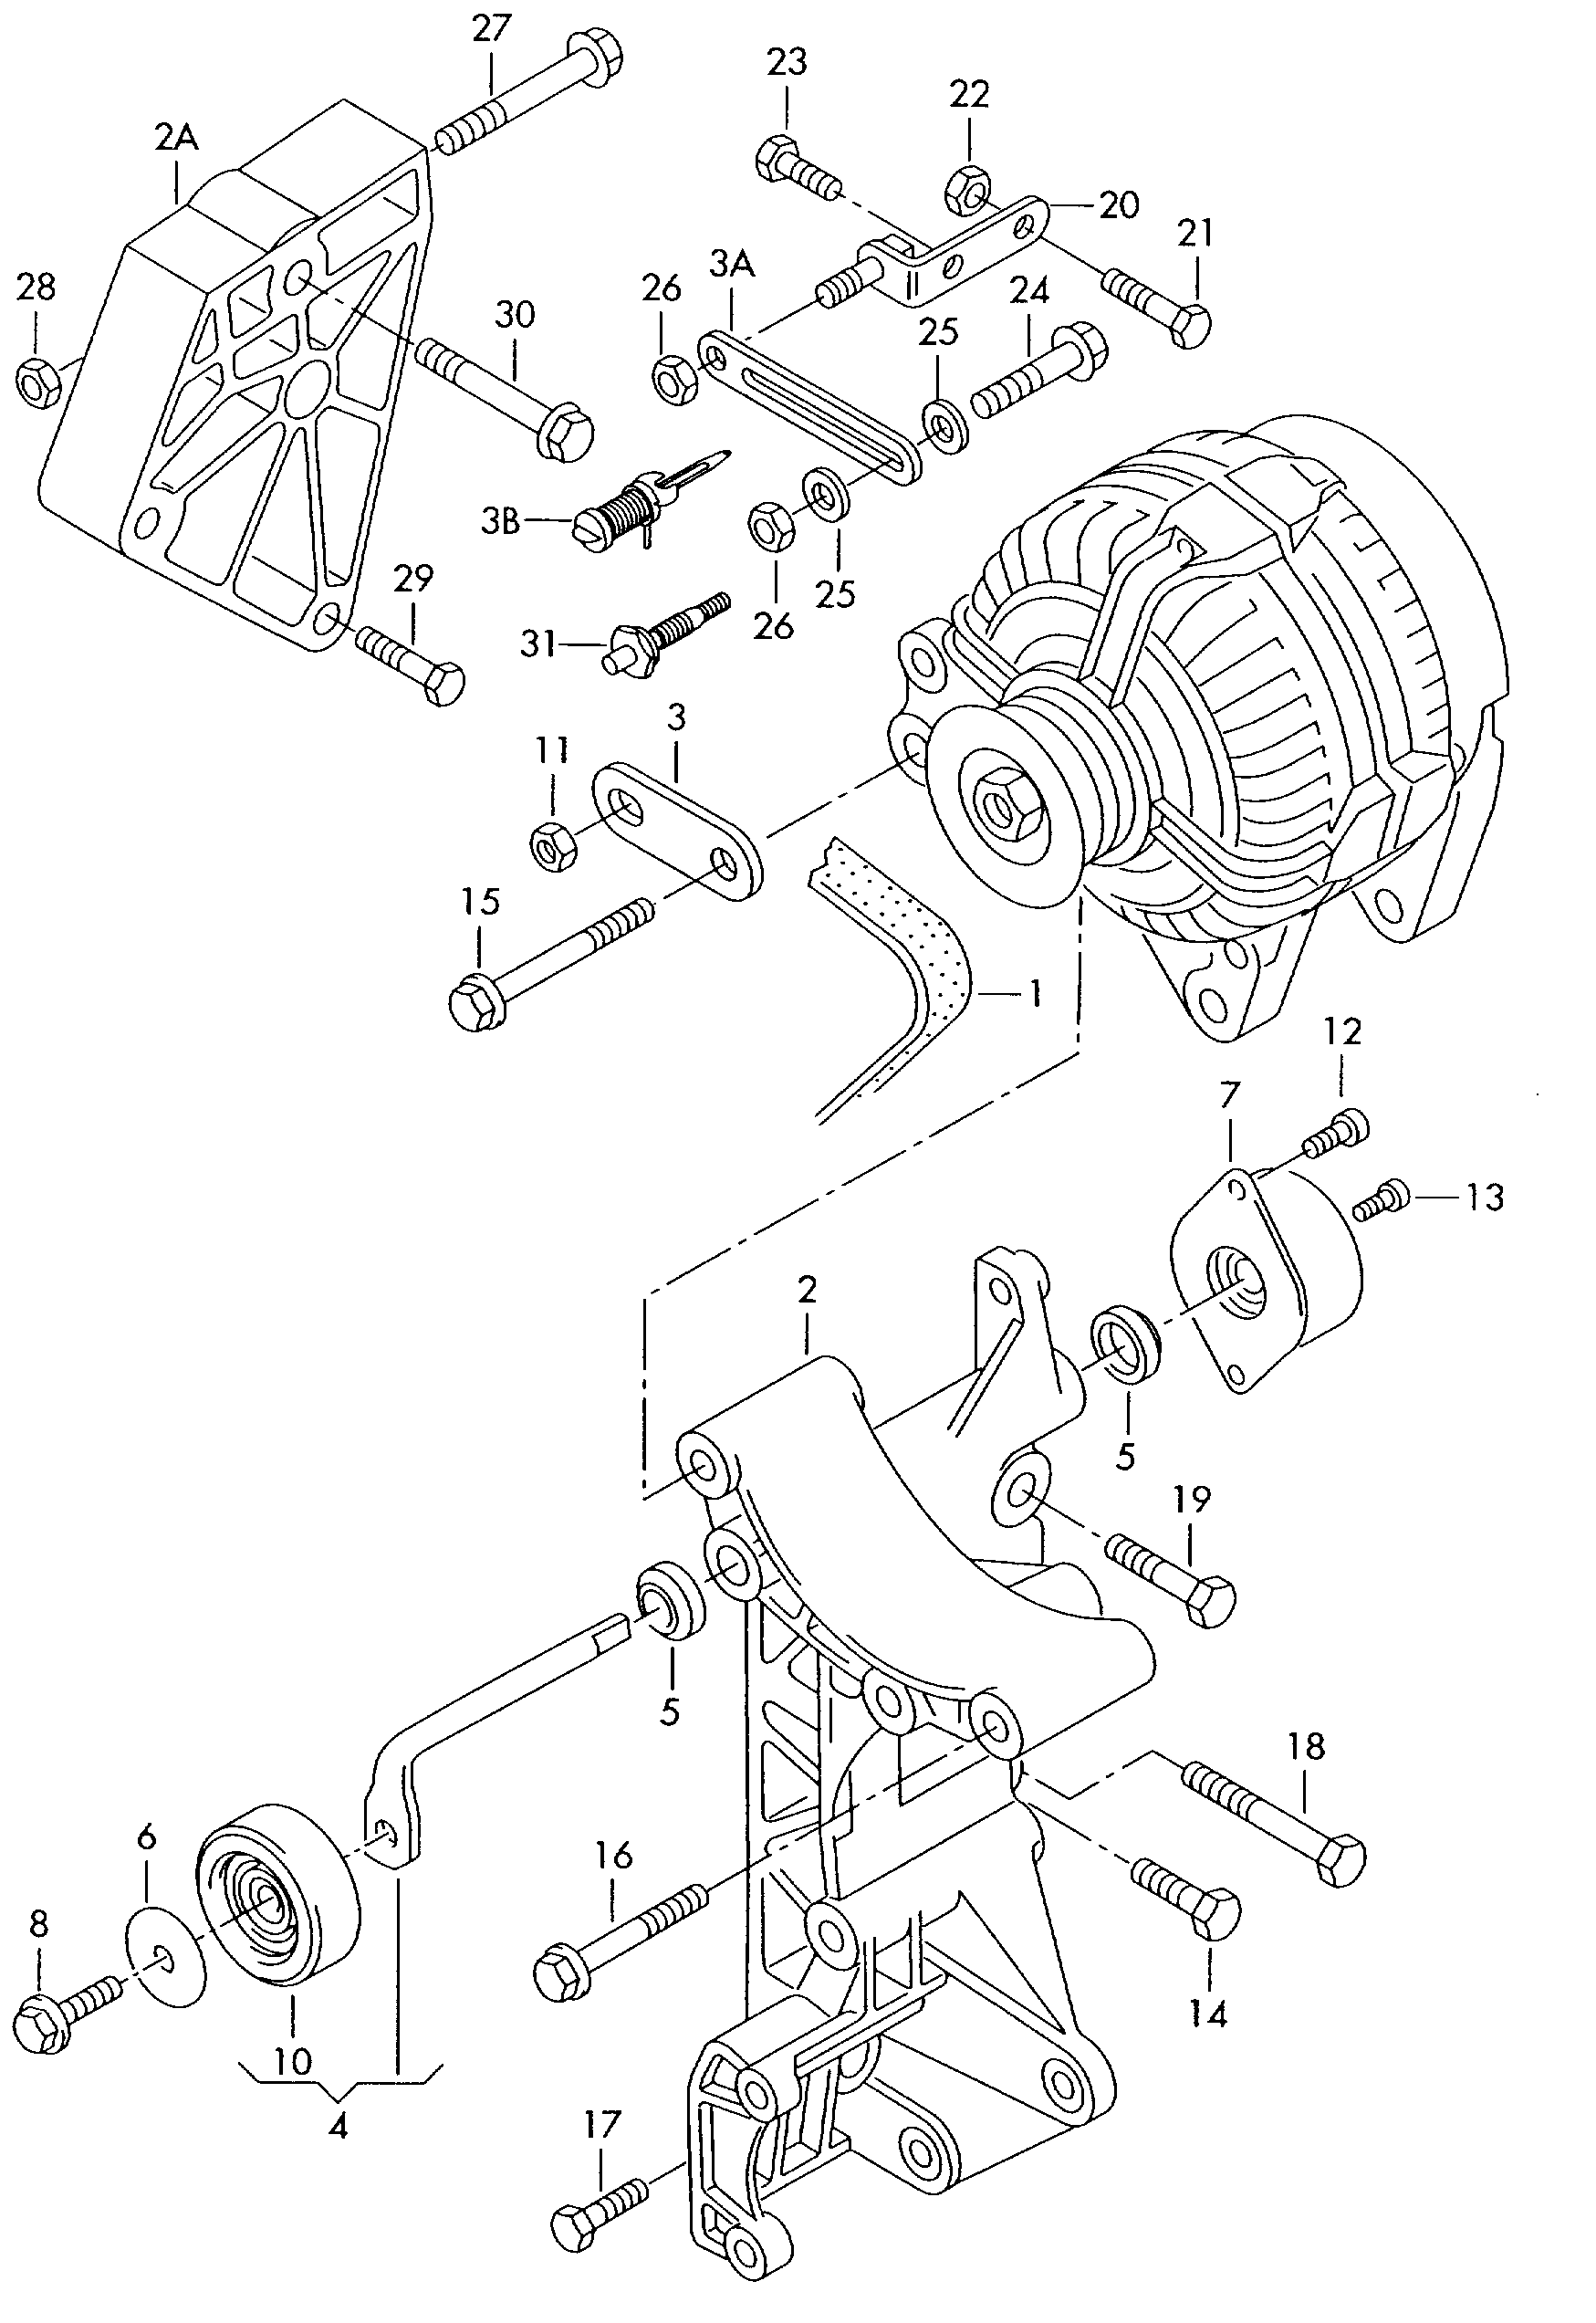 connecting and mounting parts<br>for alternatorPoly-V-belt 1.4ltr. - Octavia - oct